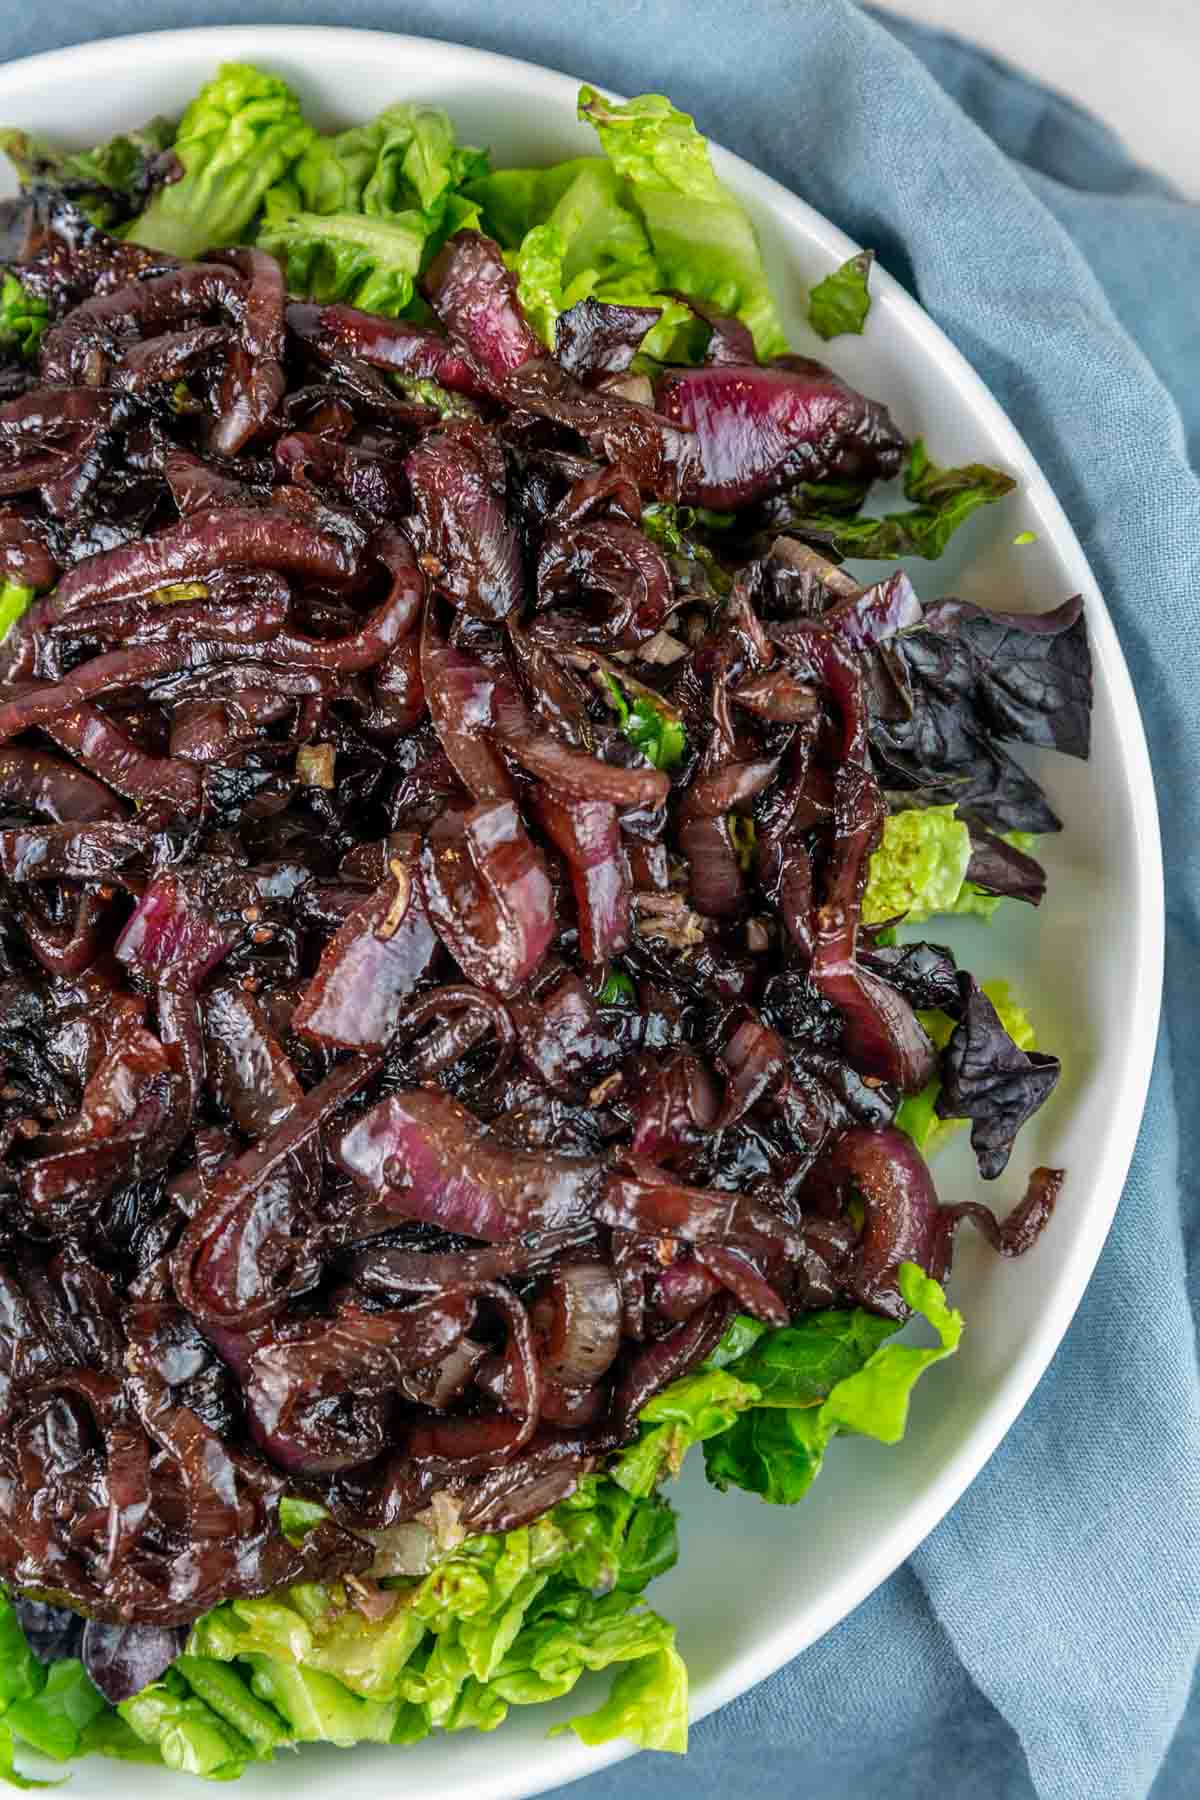 caramelized balsamic red onions on a bed of bright green lettuce